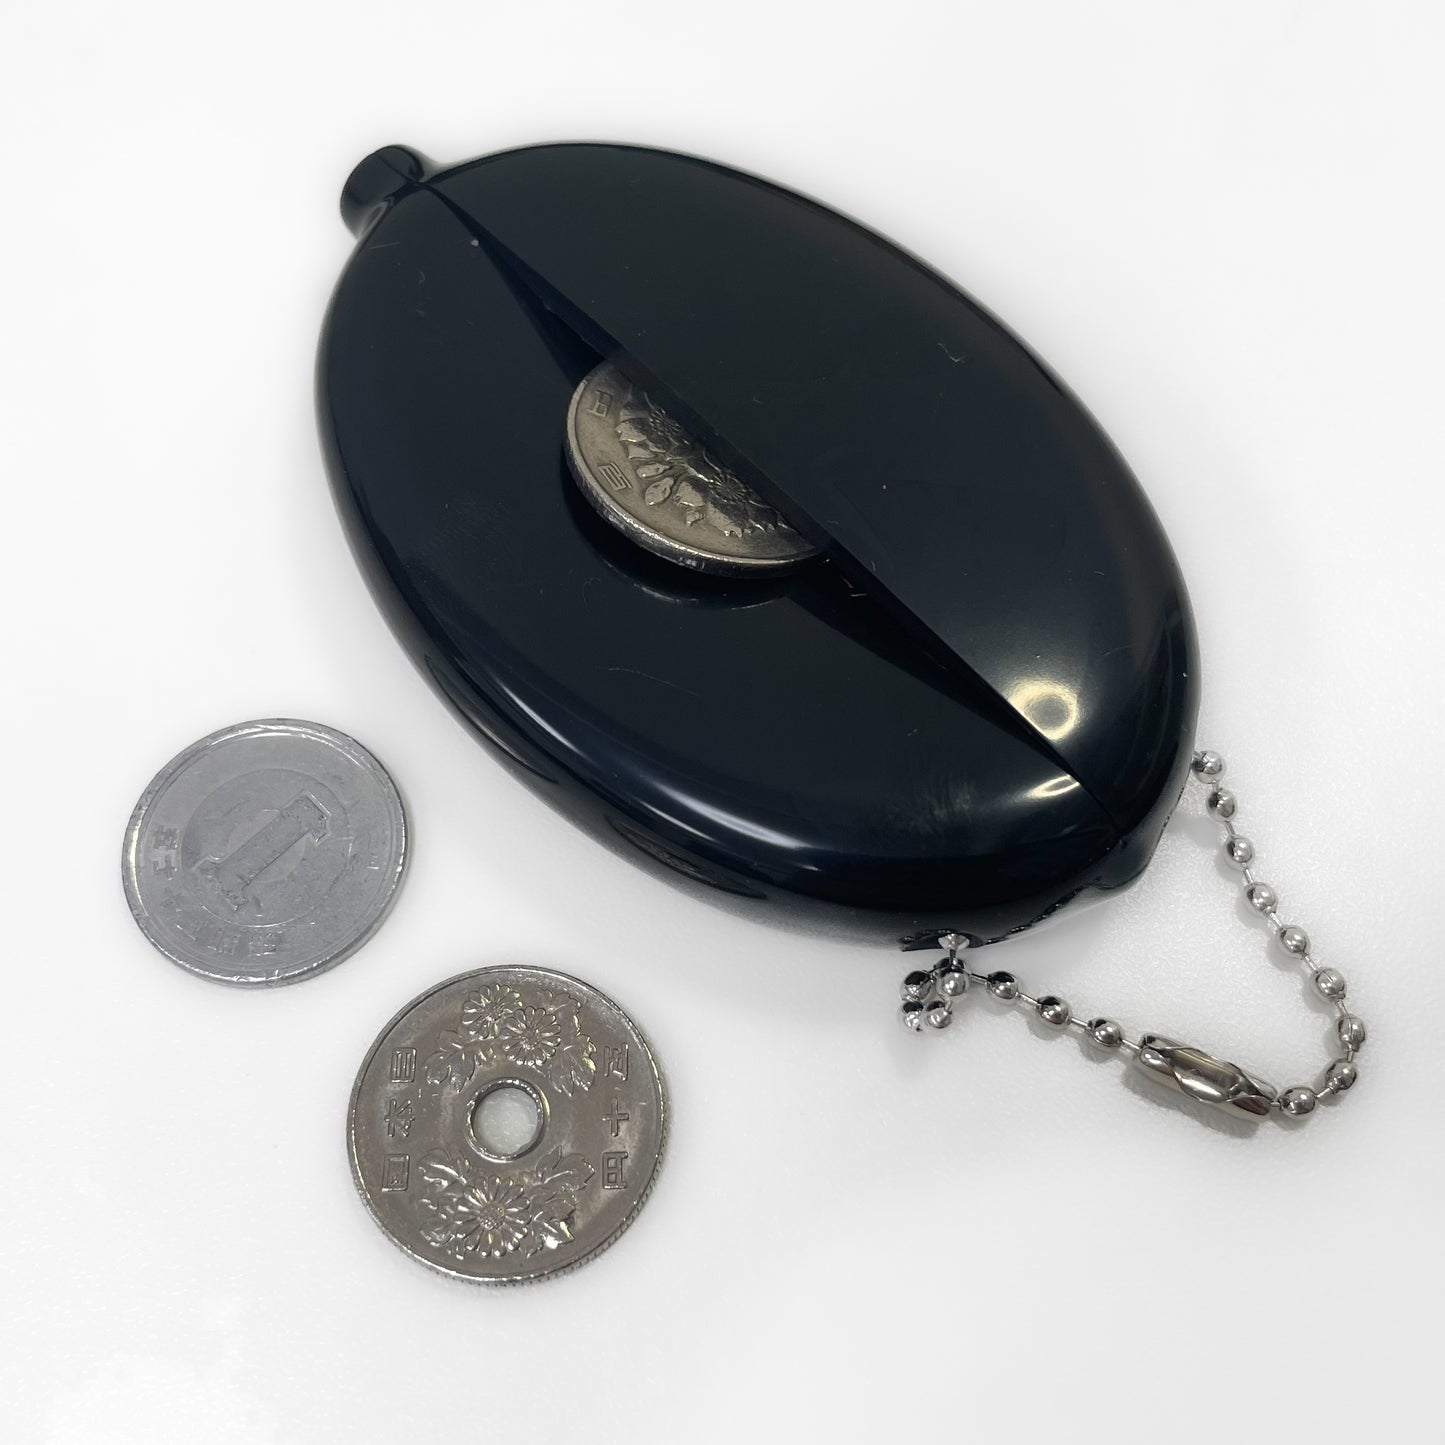 [Troublesome Zaurus] Rubber coin case [Shipped in early November]